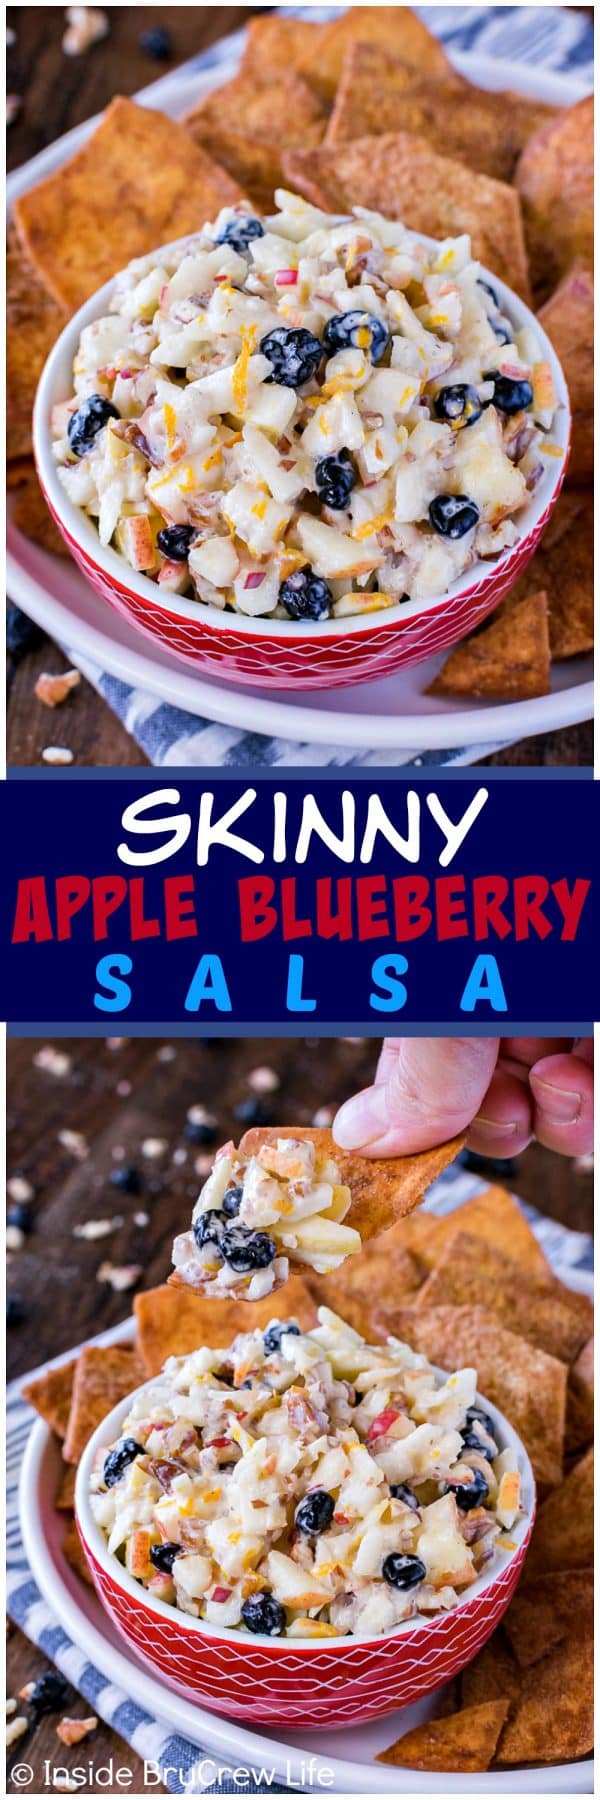 Skinny Apple Blueberry Salsa - this easy and healthy dip is loaded with apples, nuts, and orange yogurt. Great recipe to munch on during the summer!